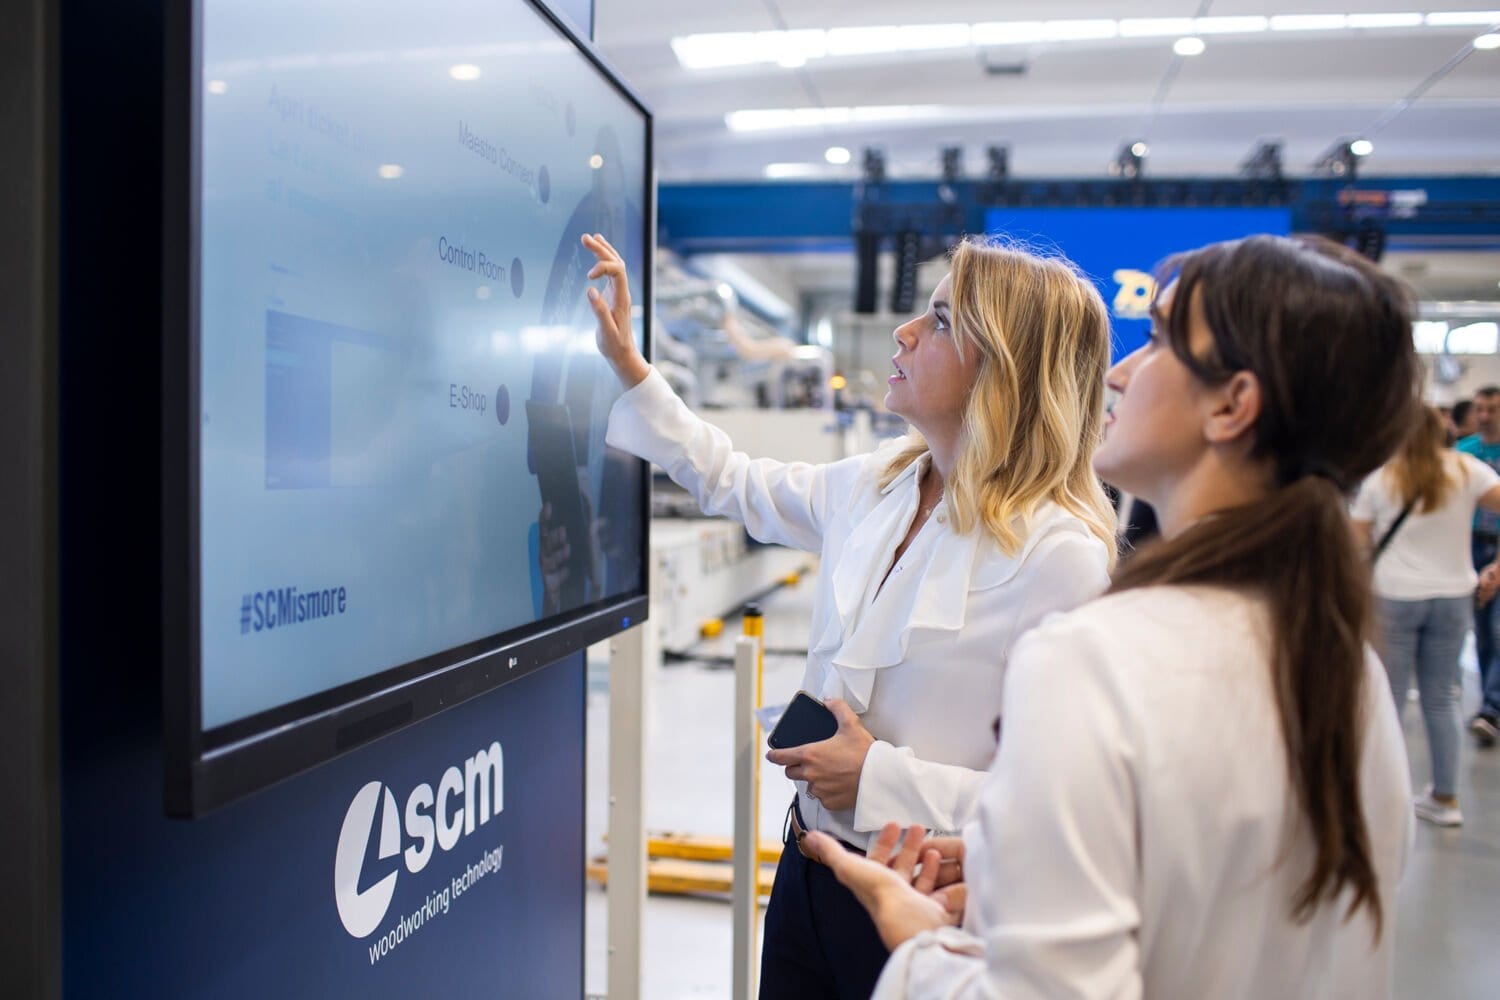 SCM inaugurates the most advanced Technology Center worldwide